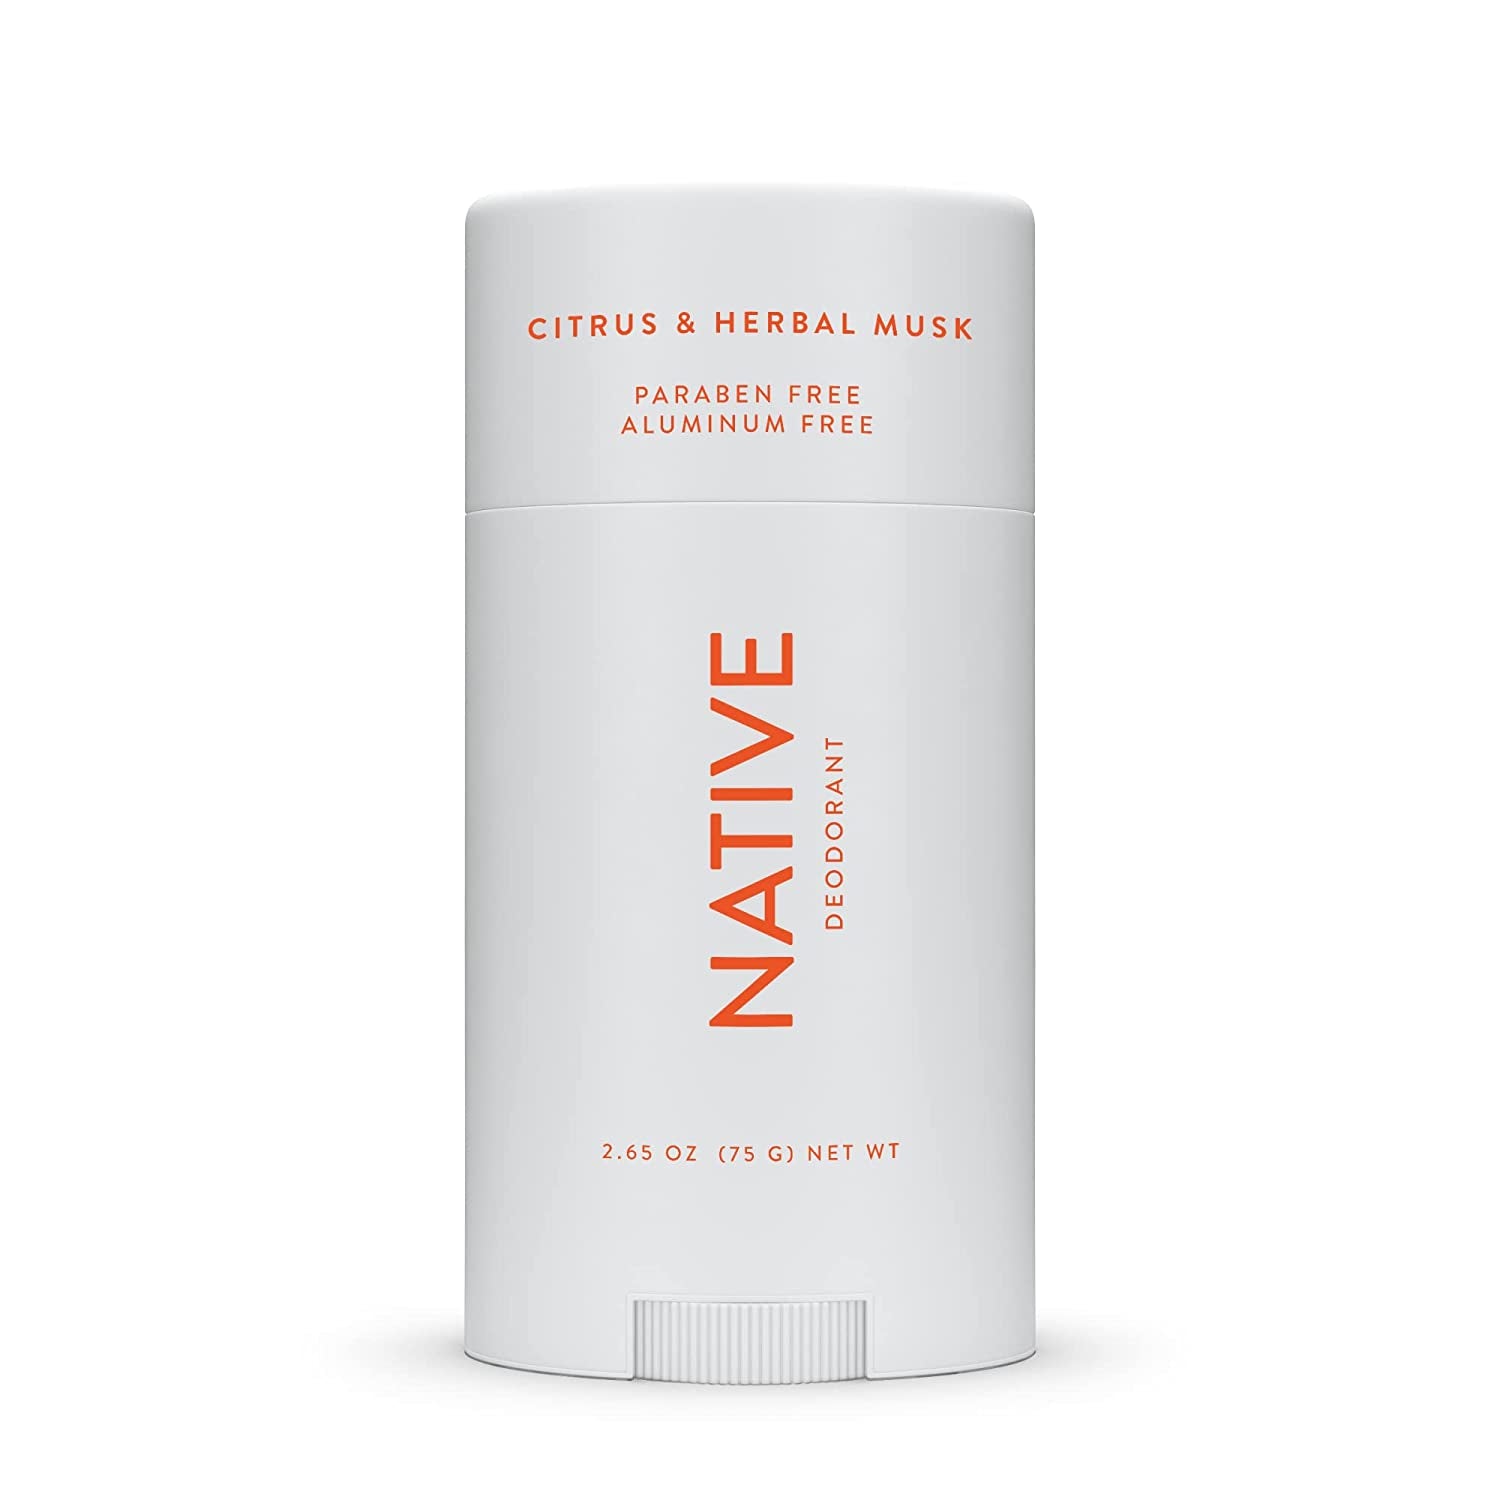 Native Deodorant | Natural Deodorant for Men and Women, Aluminum Free with Baking Soda, Probiotics, Coconut Oil and Shea Butter | Eucalyptus & Mint